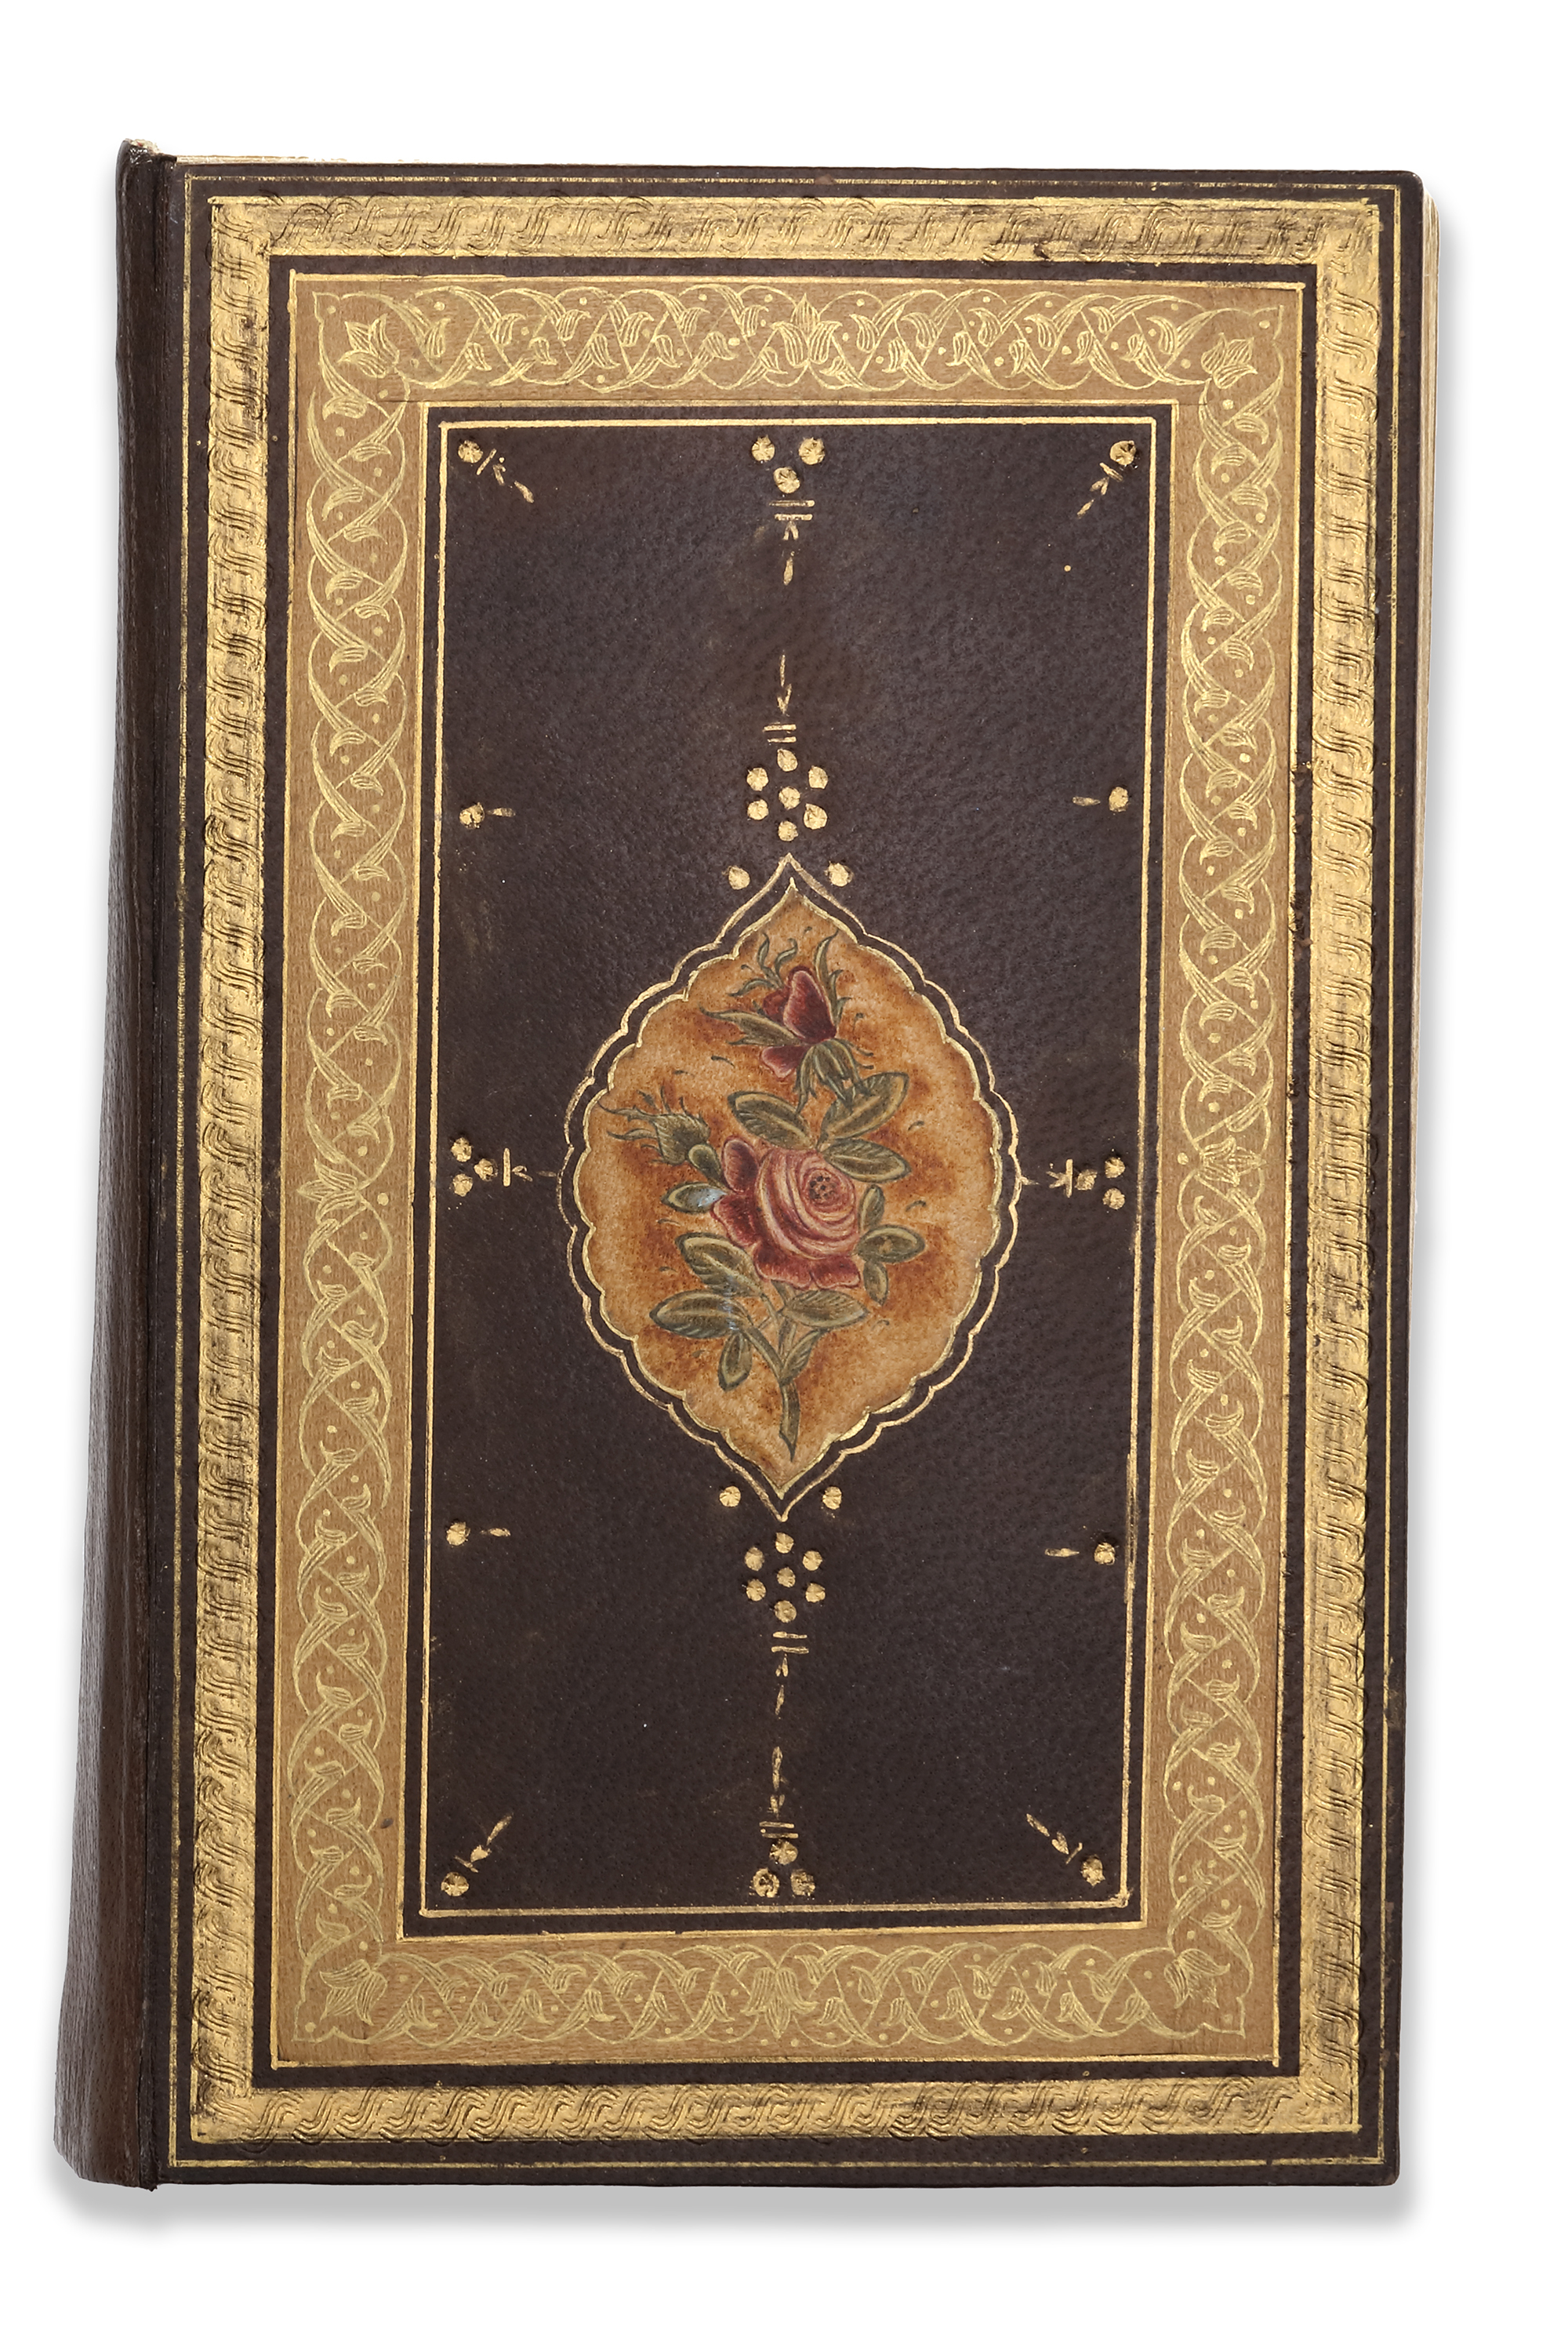 AN ILLUMINATED OTTOMAN QURAN SIGNED BY AHMED STUDENT OF HAFIZ OSMAN, 18TH CENTURY - Image 7 of 7